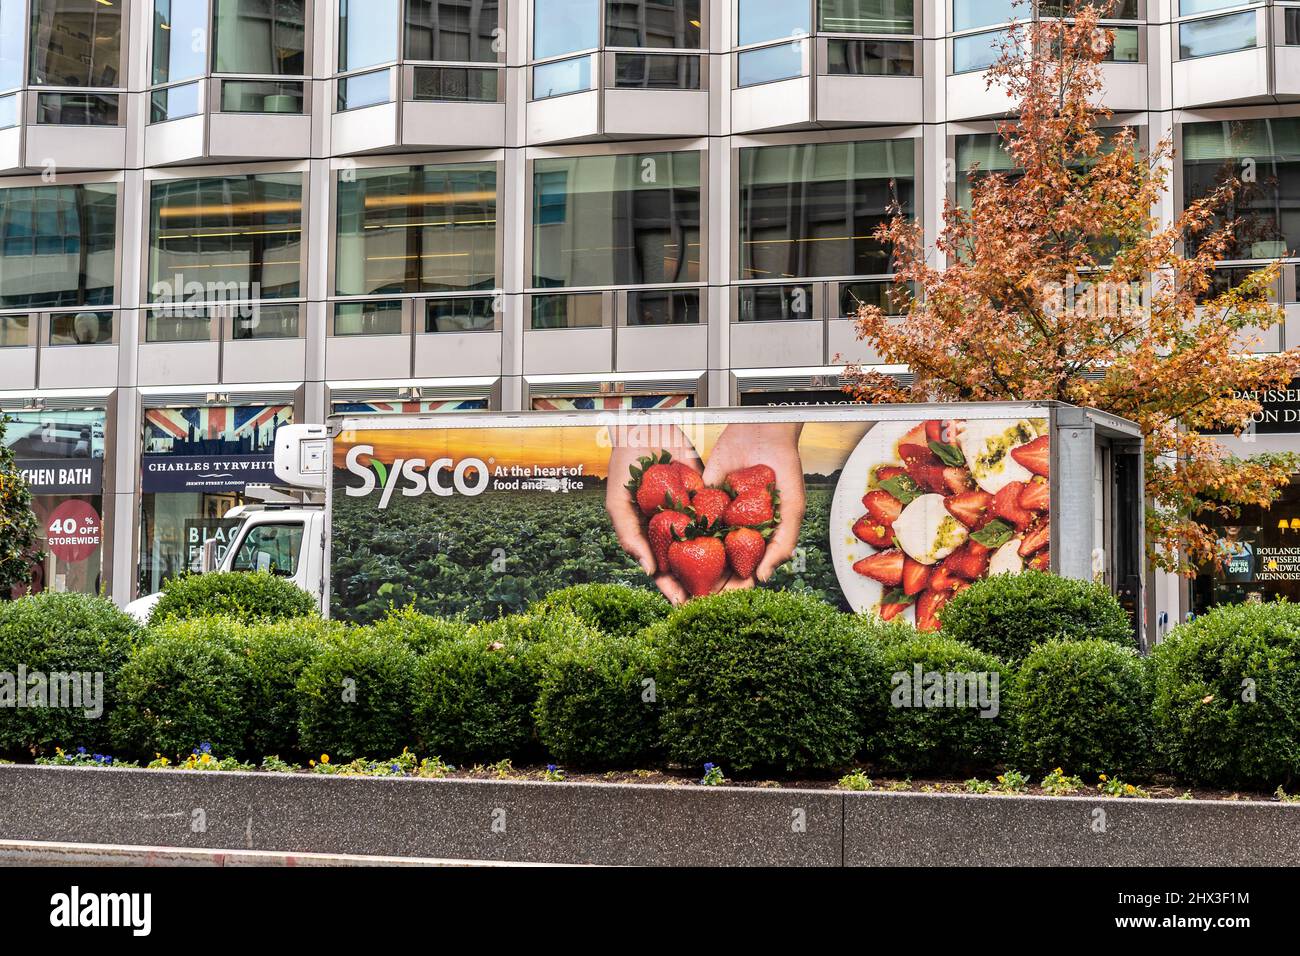 Washington D.C. - Nov. 22, 2021: Sysco delivery truck parked on the street servicing a customer. Stock Photo